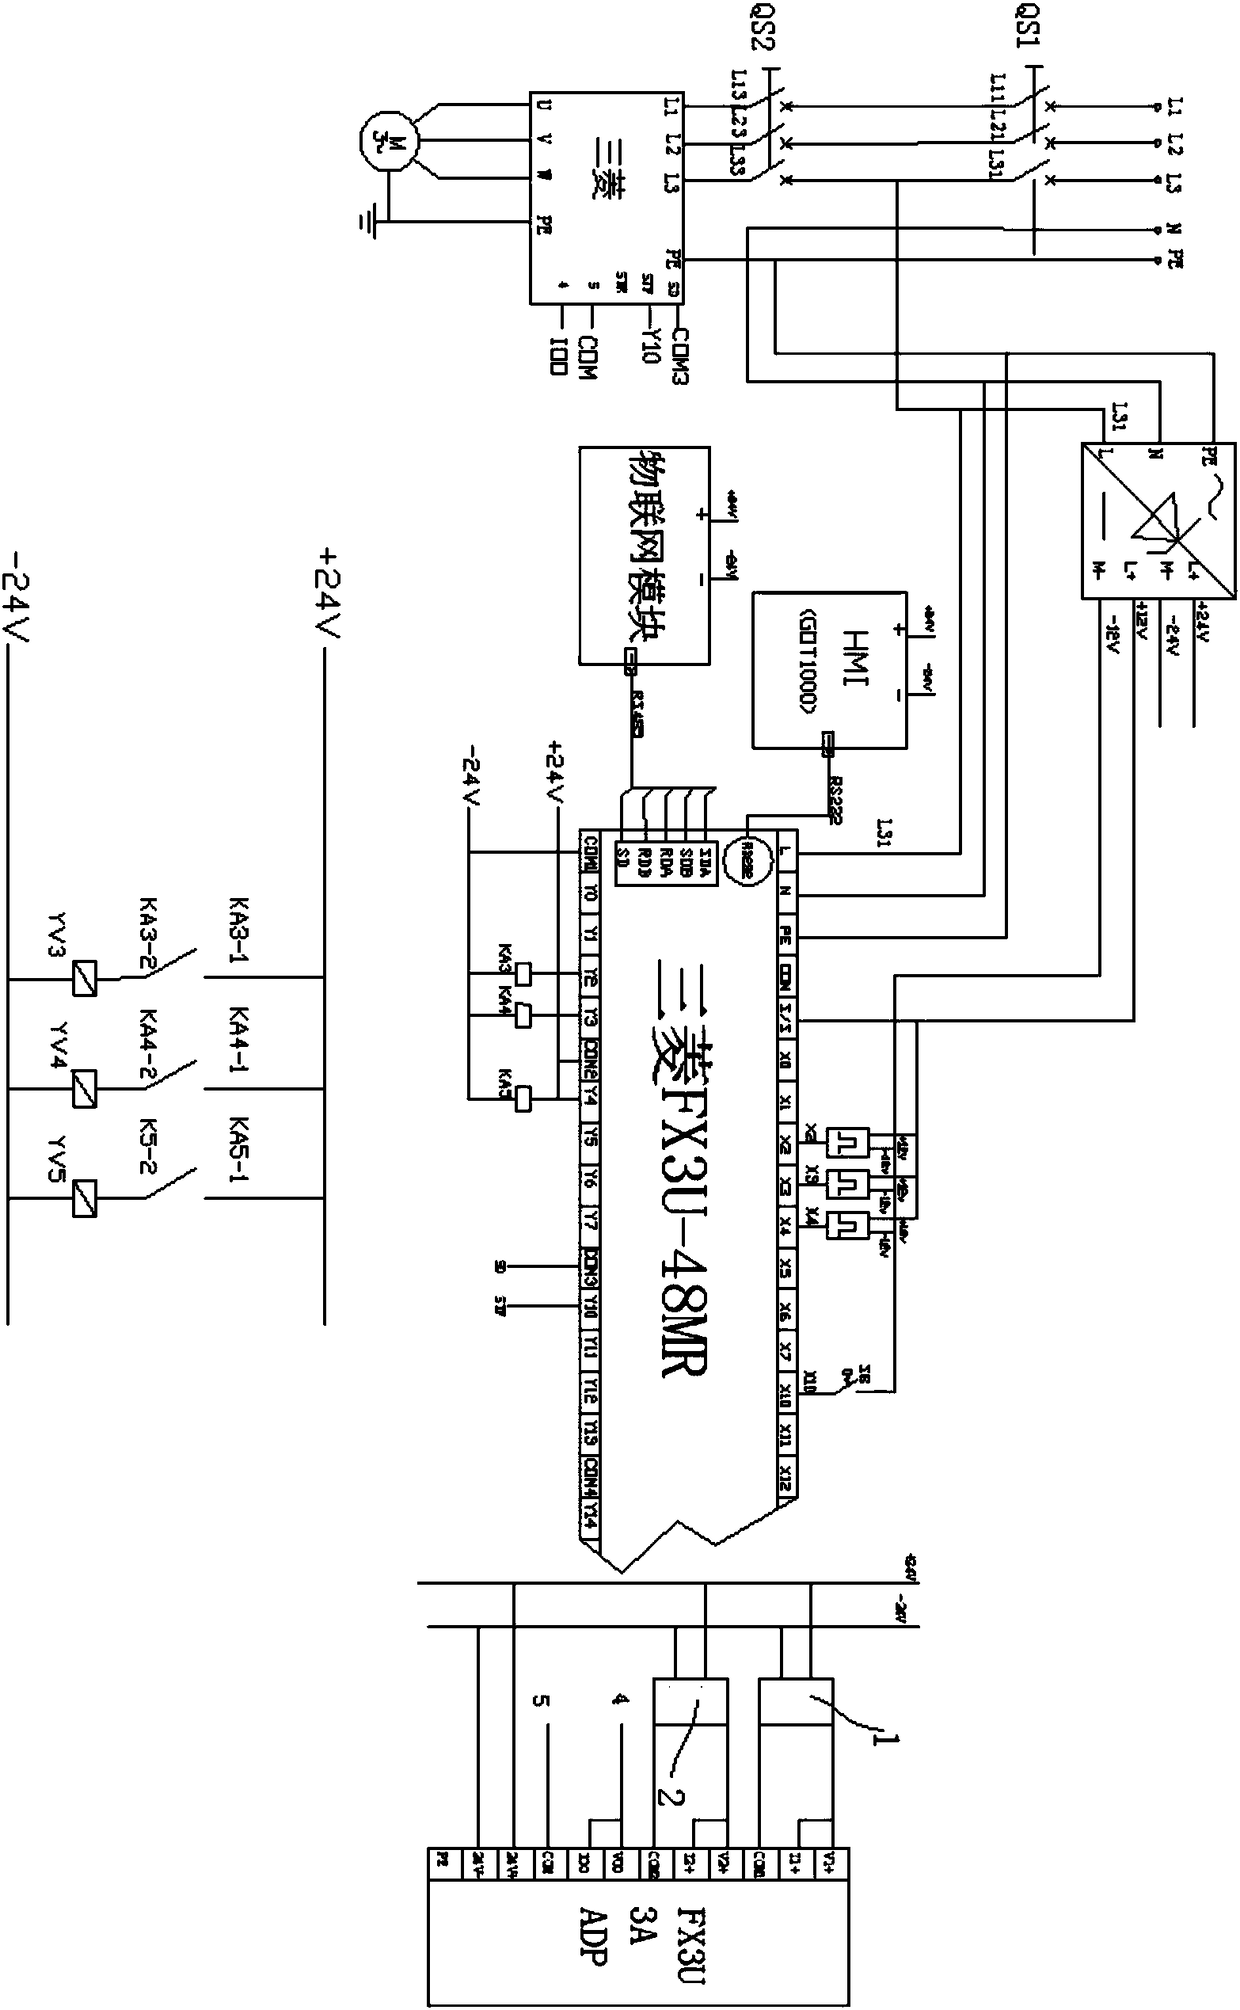 Visual pipeline automatic alarm and control system in water supply system